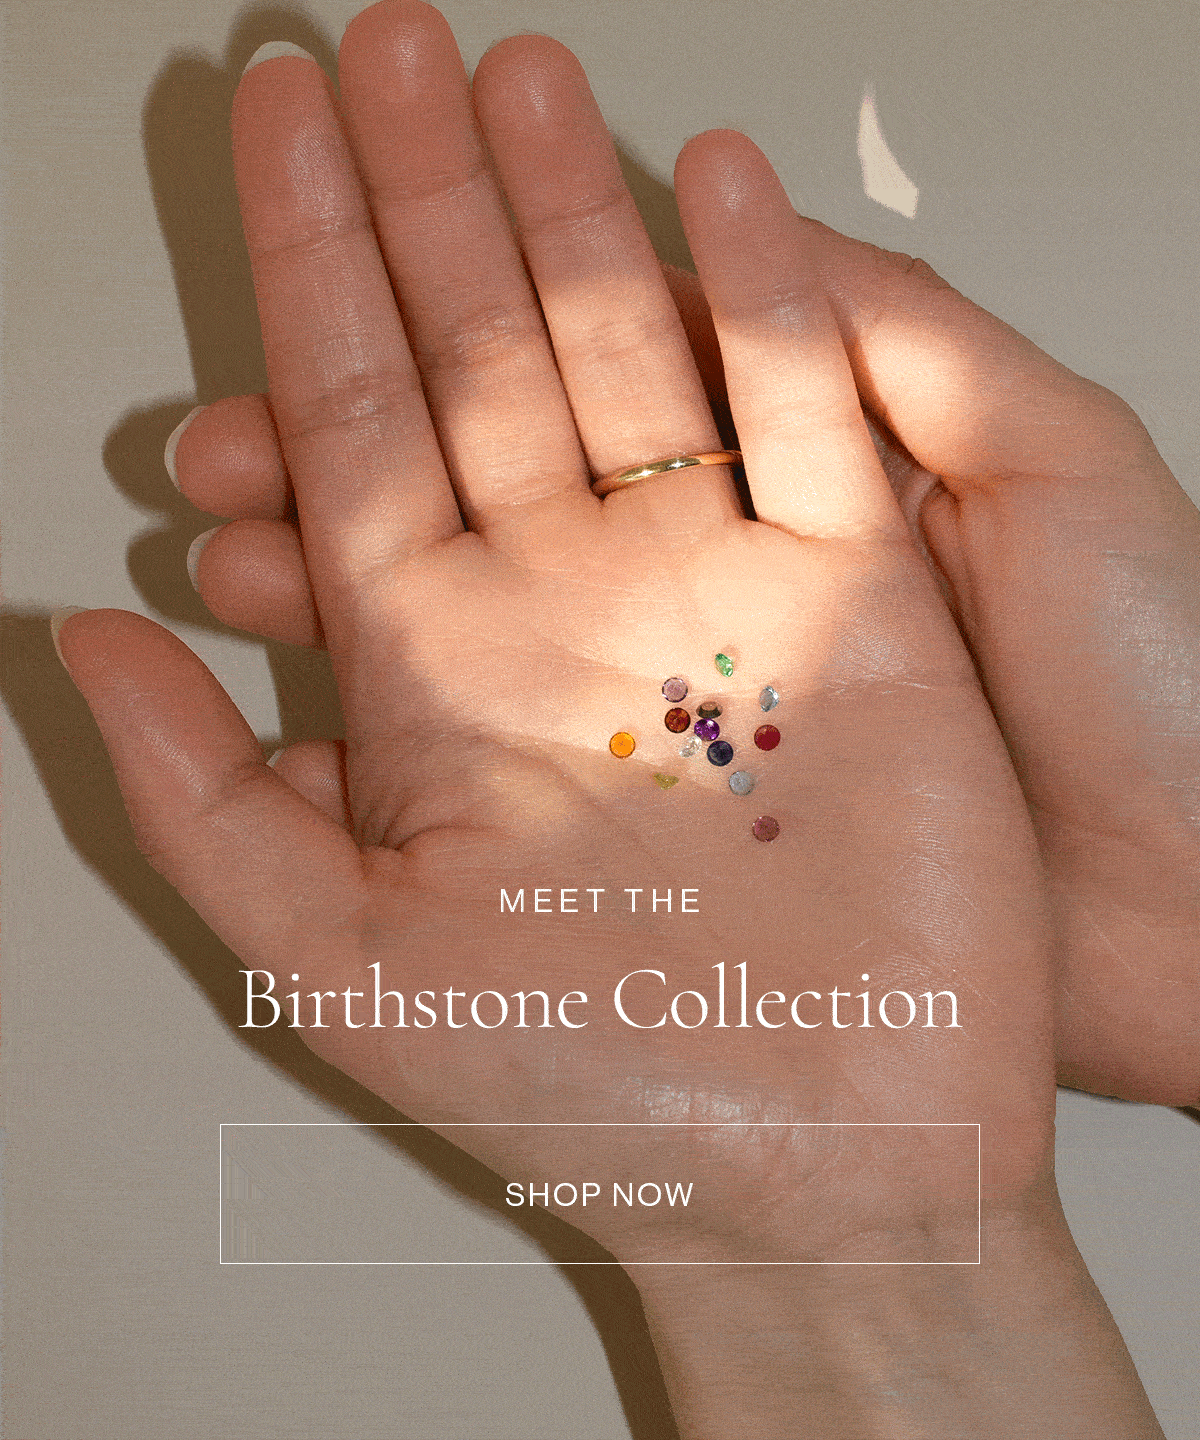 Meet The Birthstone Collection